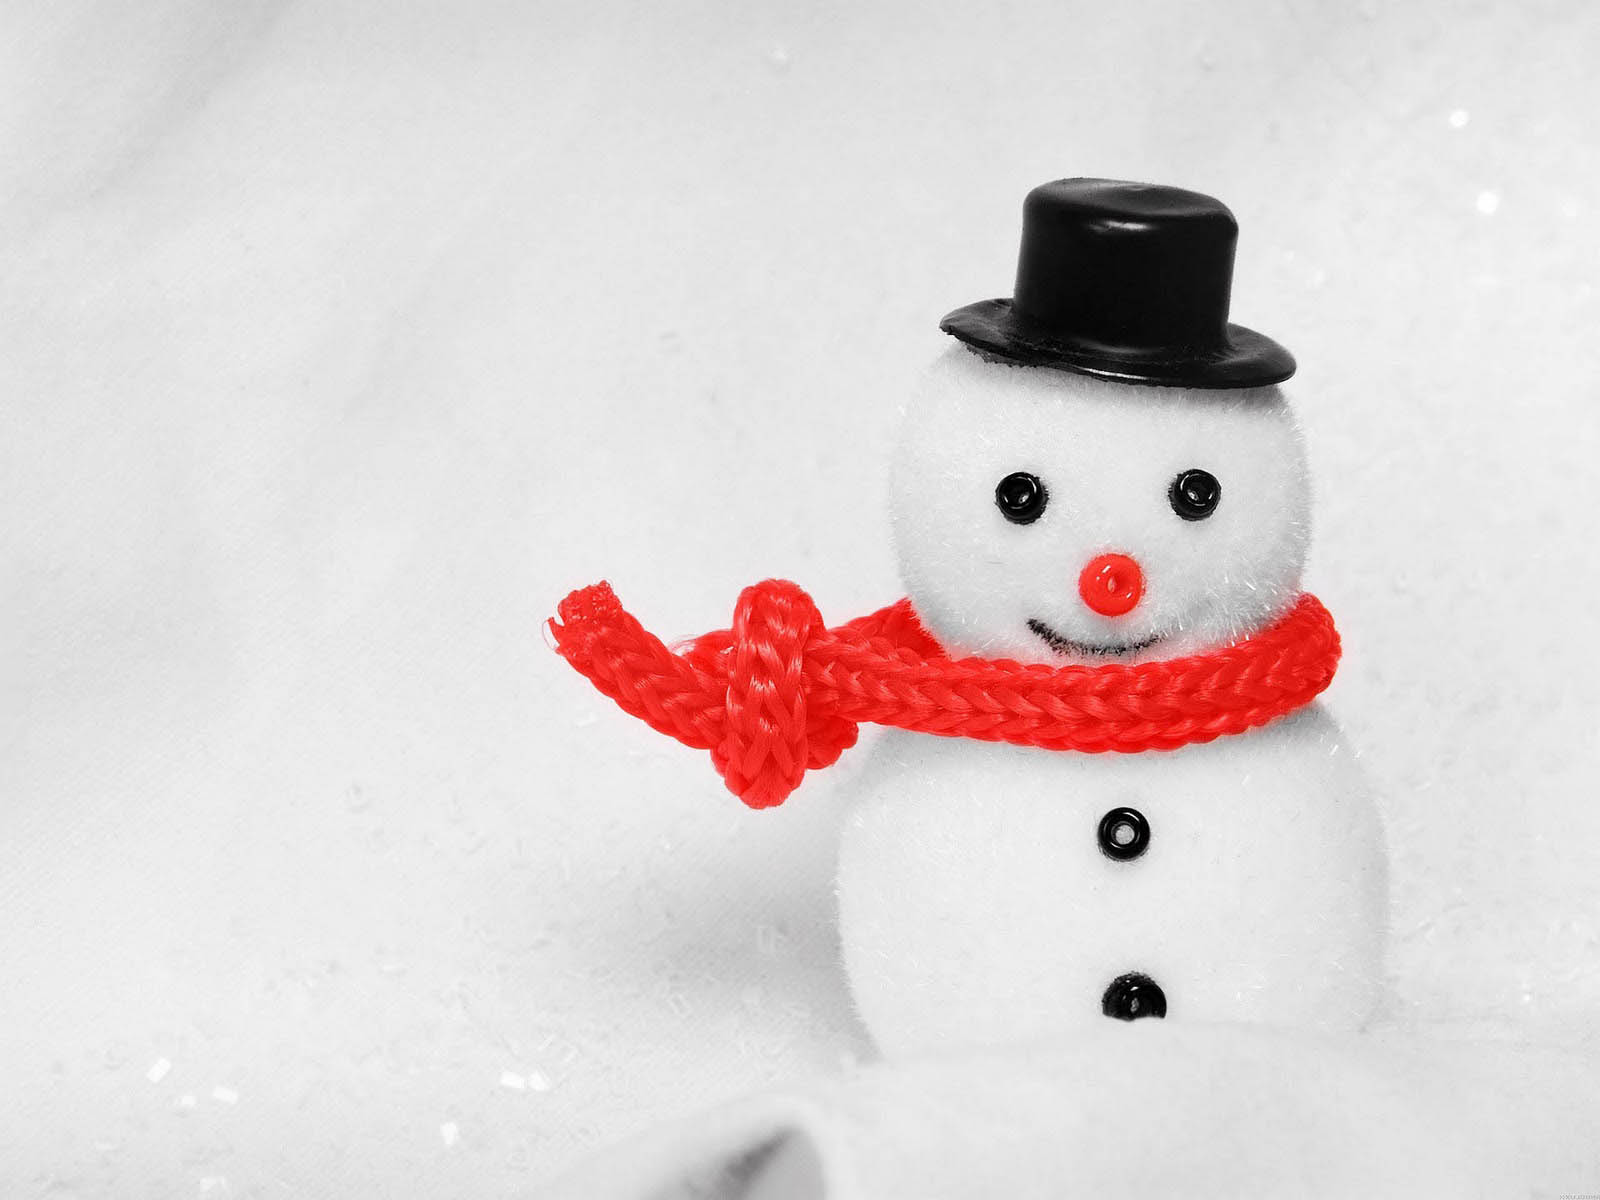 Snowman Wallpaper Background Paos Pictures And Image For